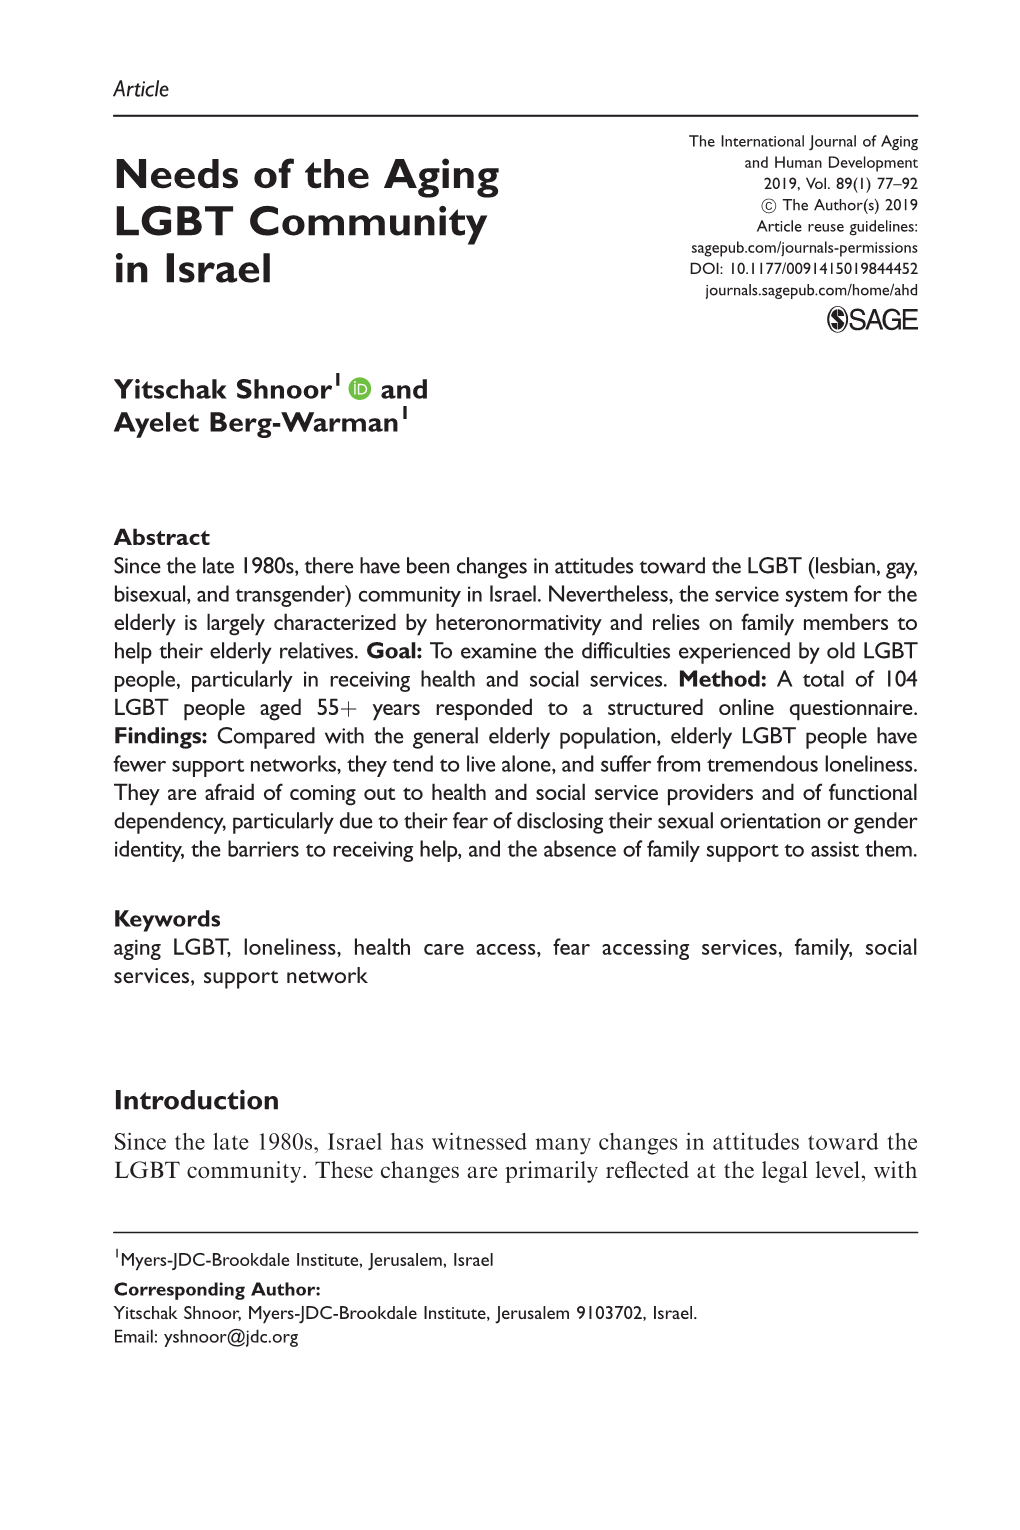 Needs of the Aging LGBT Community in Israel